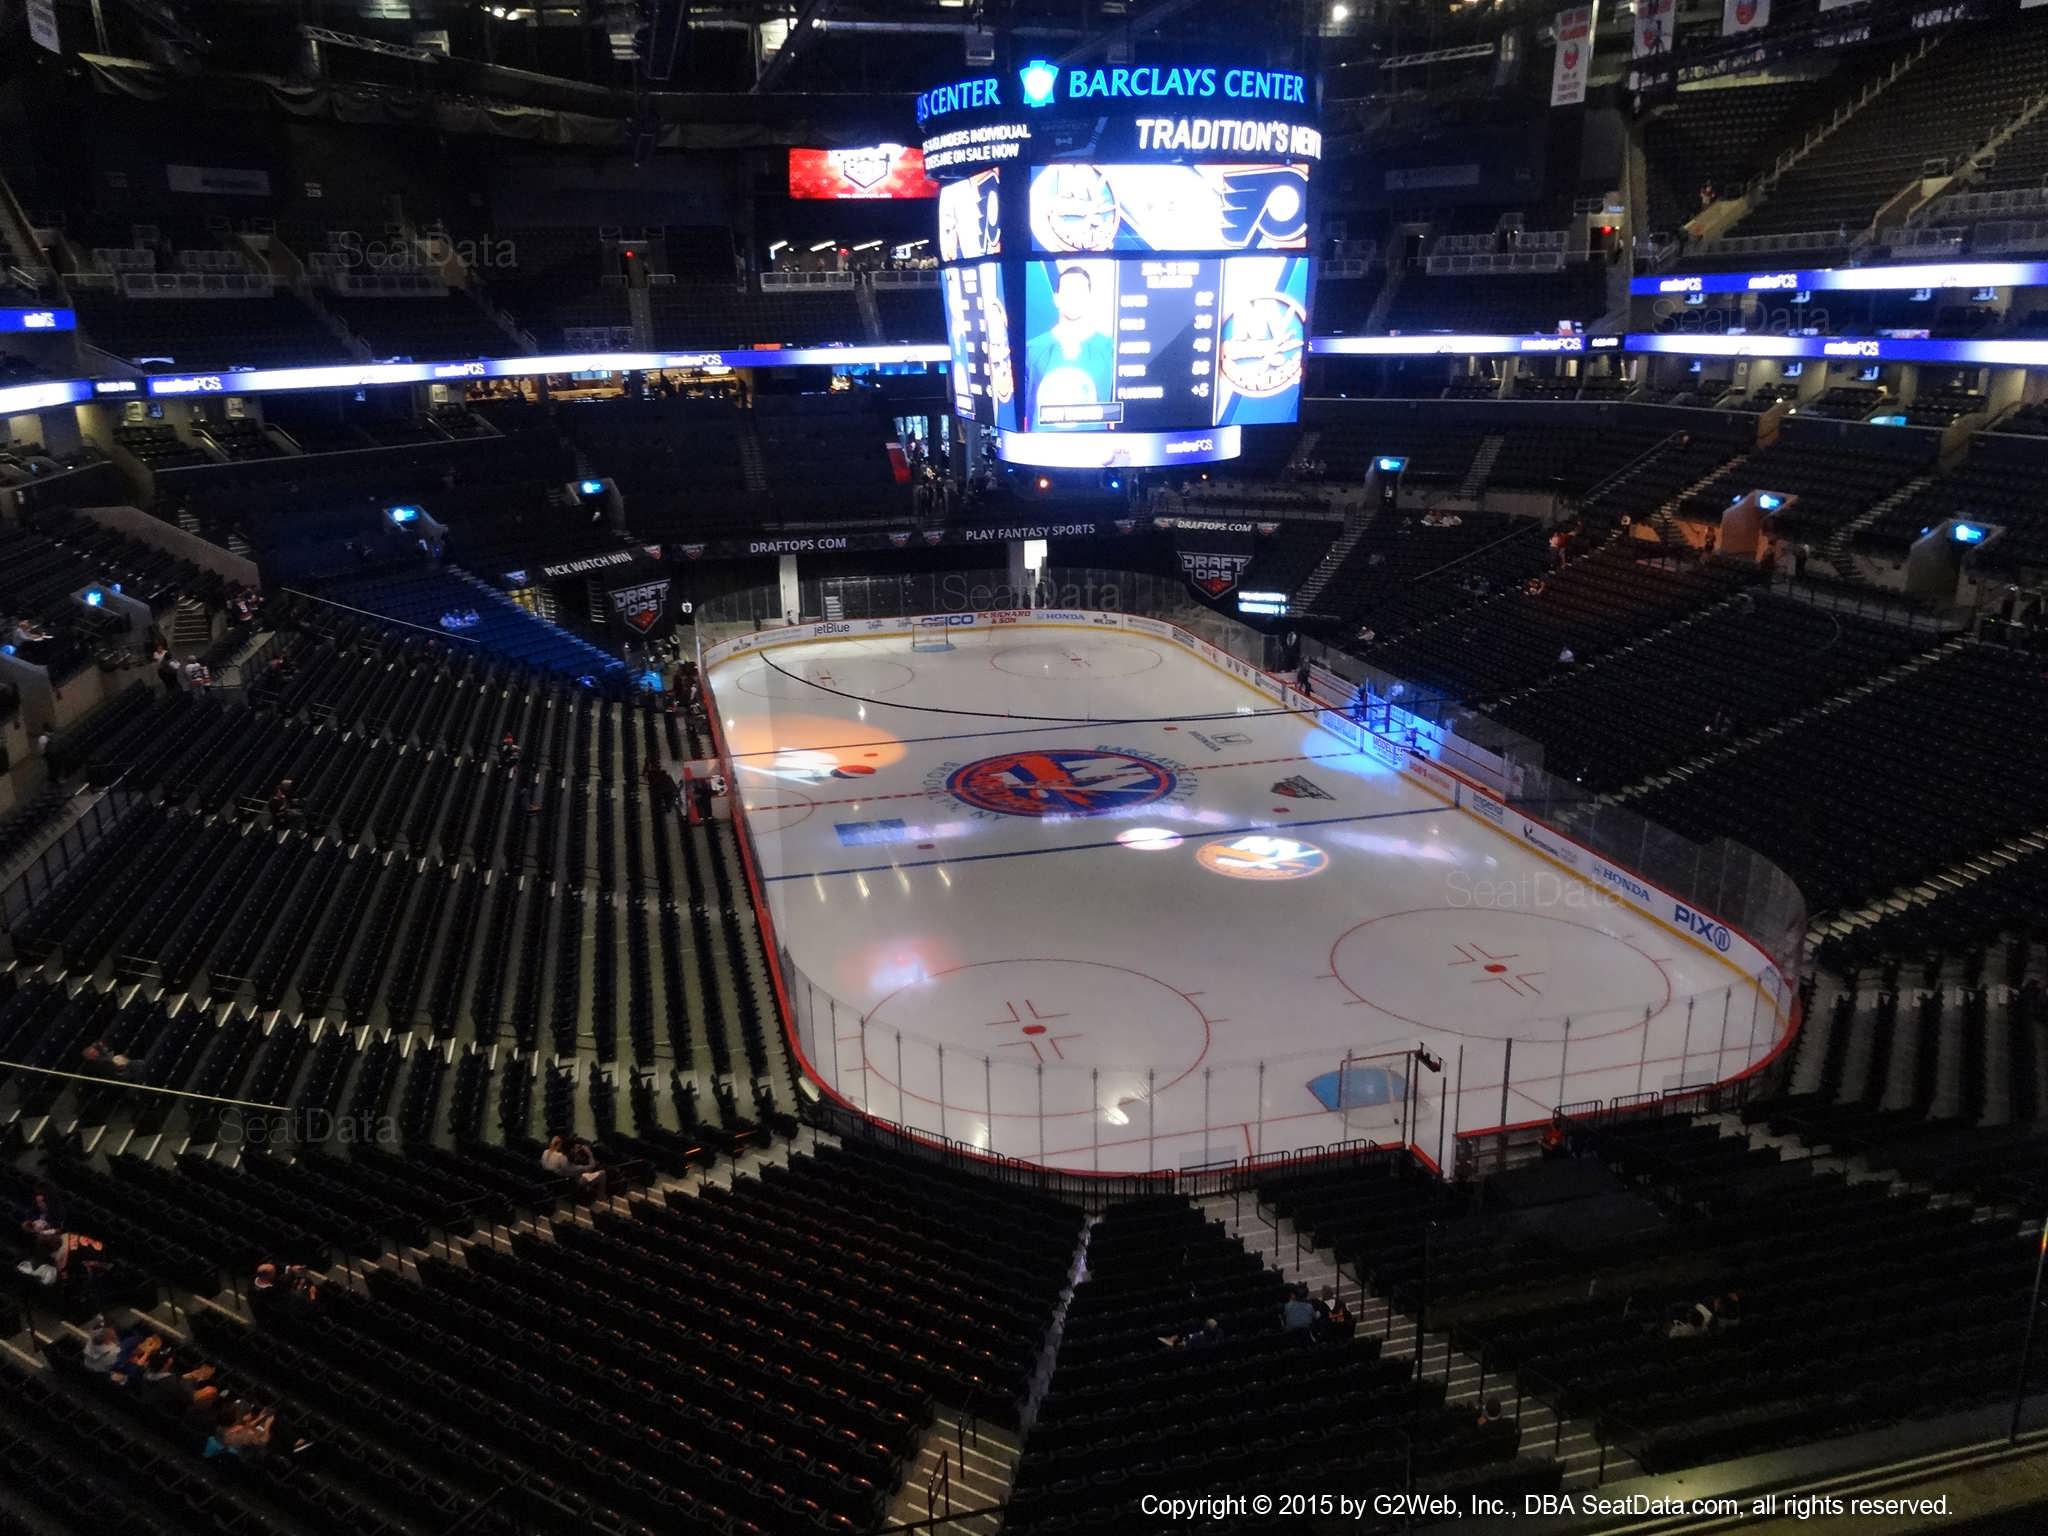 Seat View from Section 218 at the Barclays Center, home of the New York Islanders